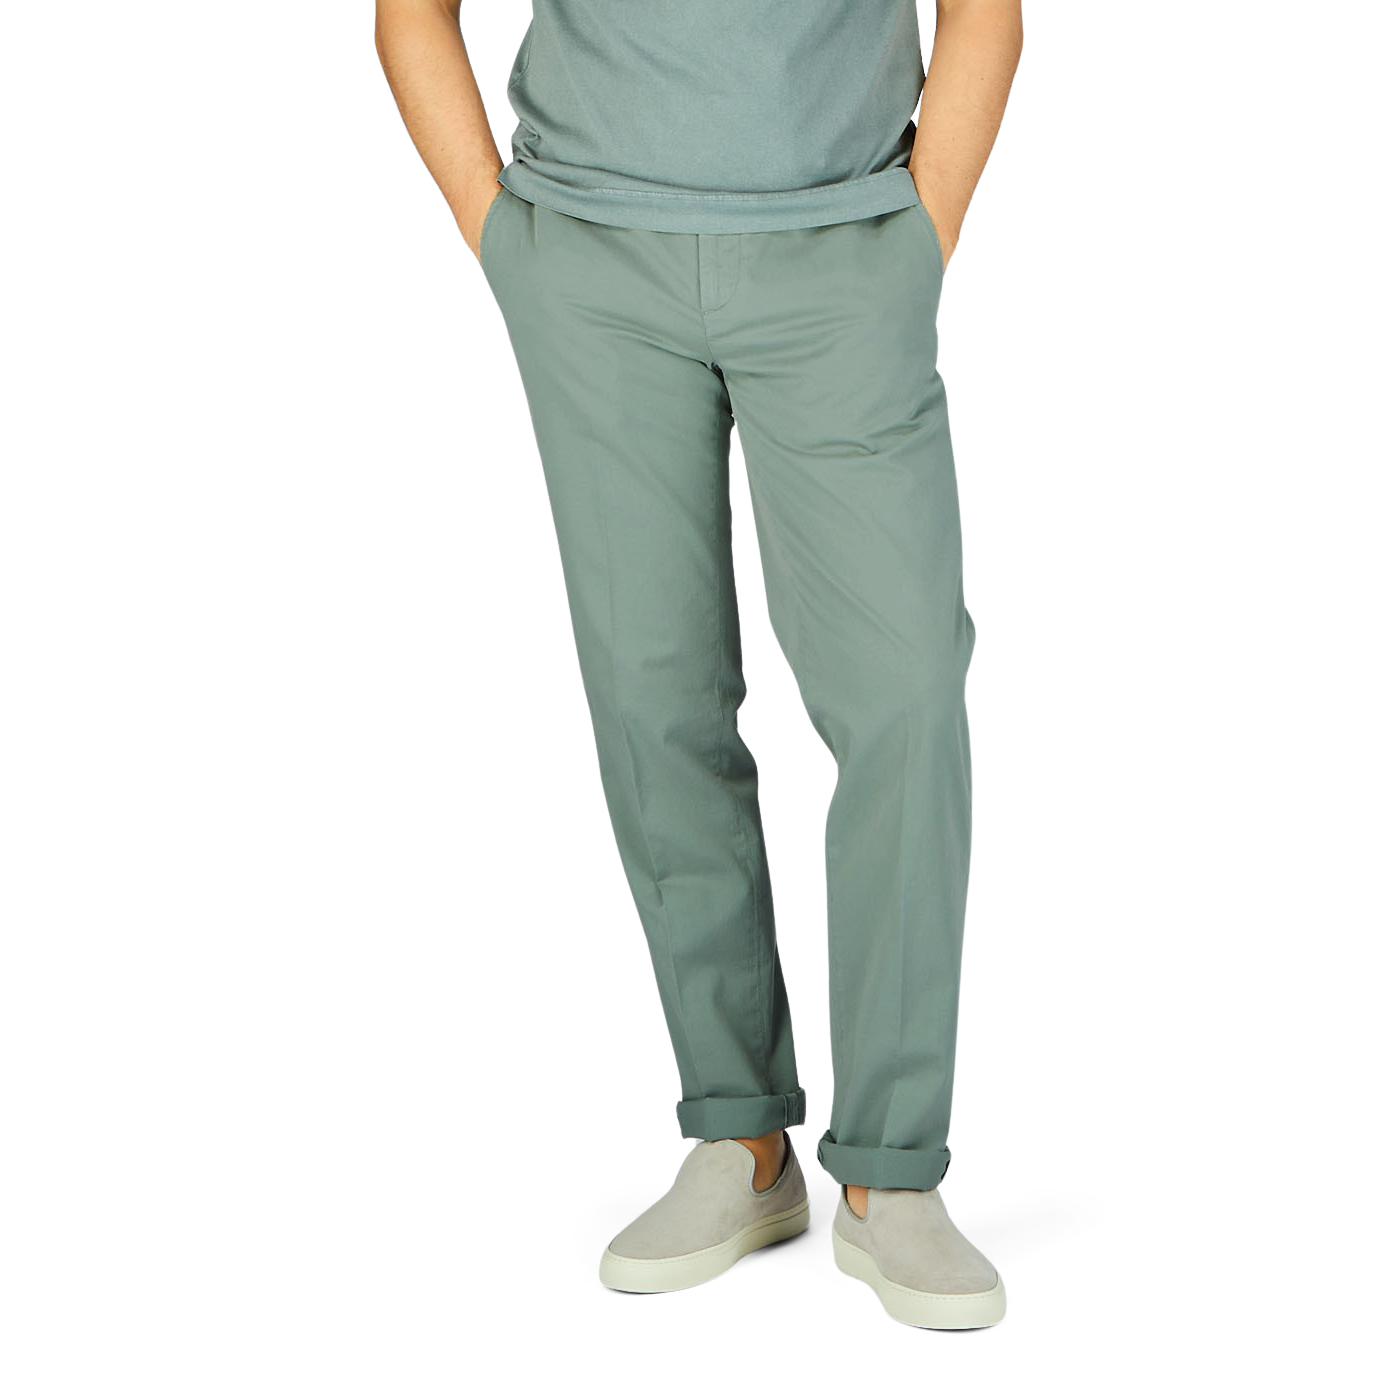 A man wearing Sage Green Cotton Stretch Flat Front Chinos from Canali and a white cotton shirt.